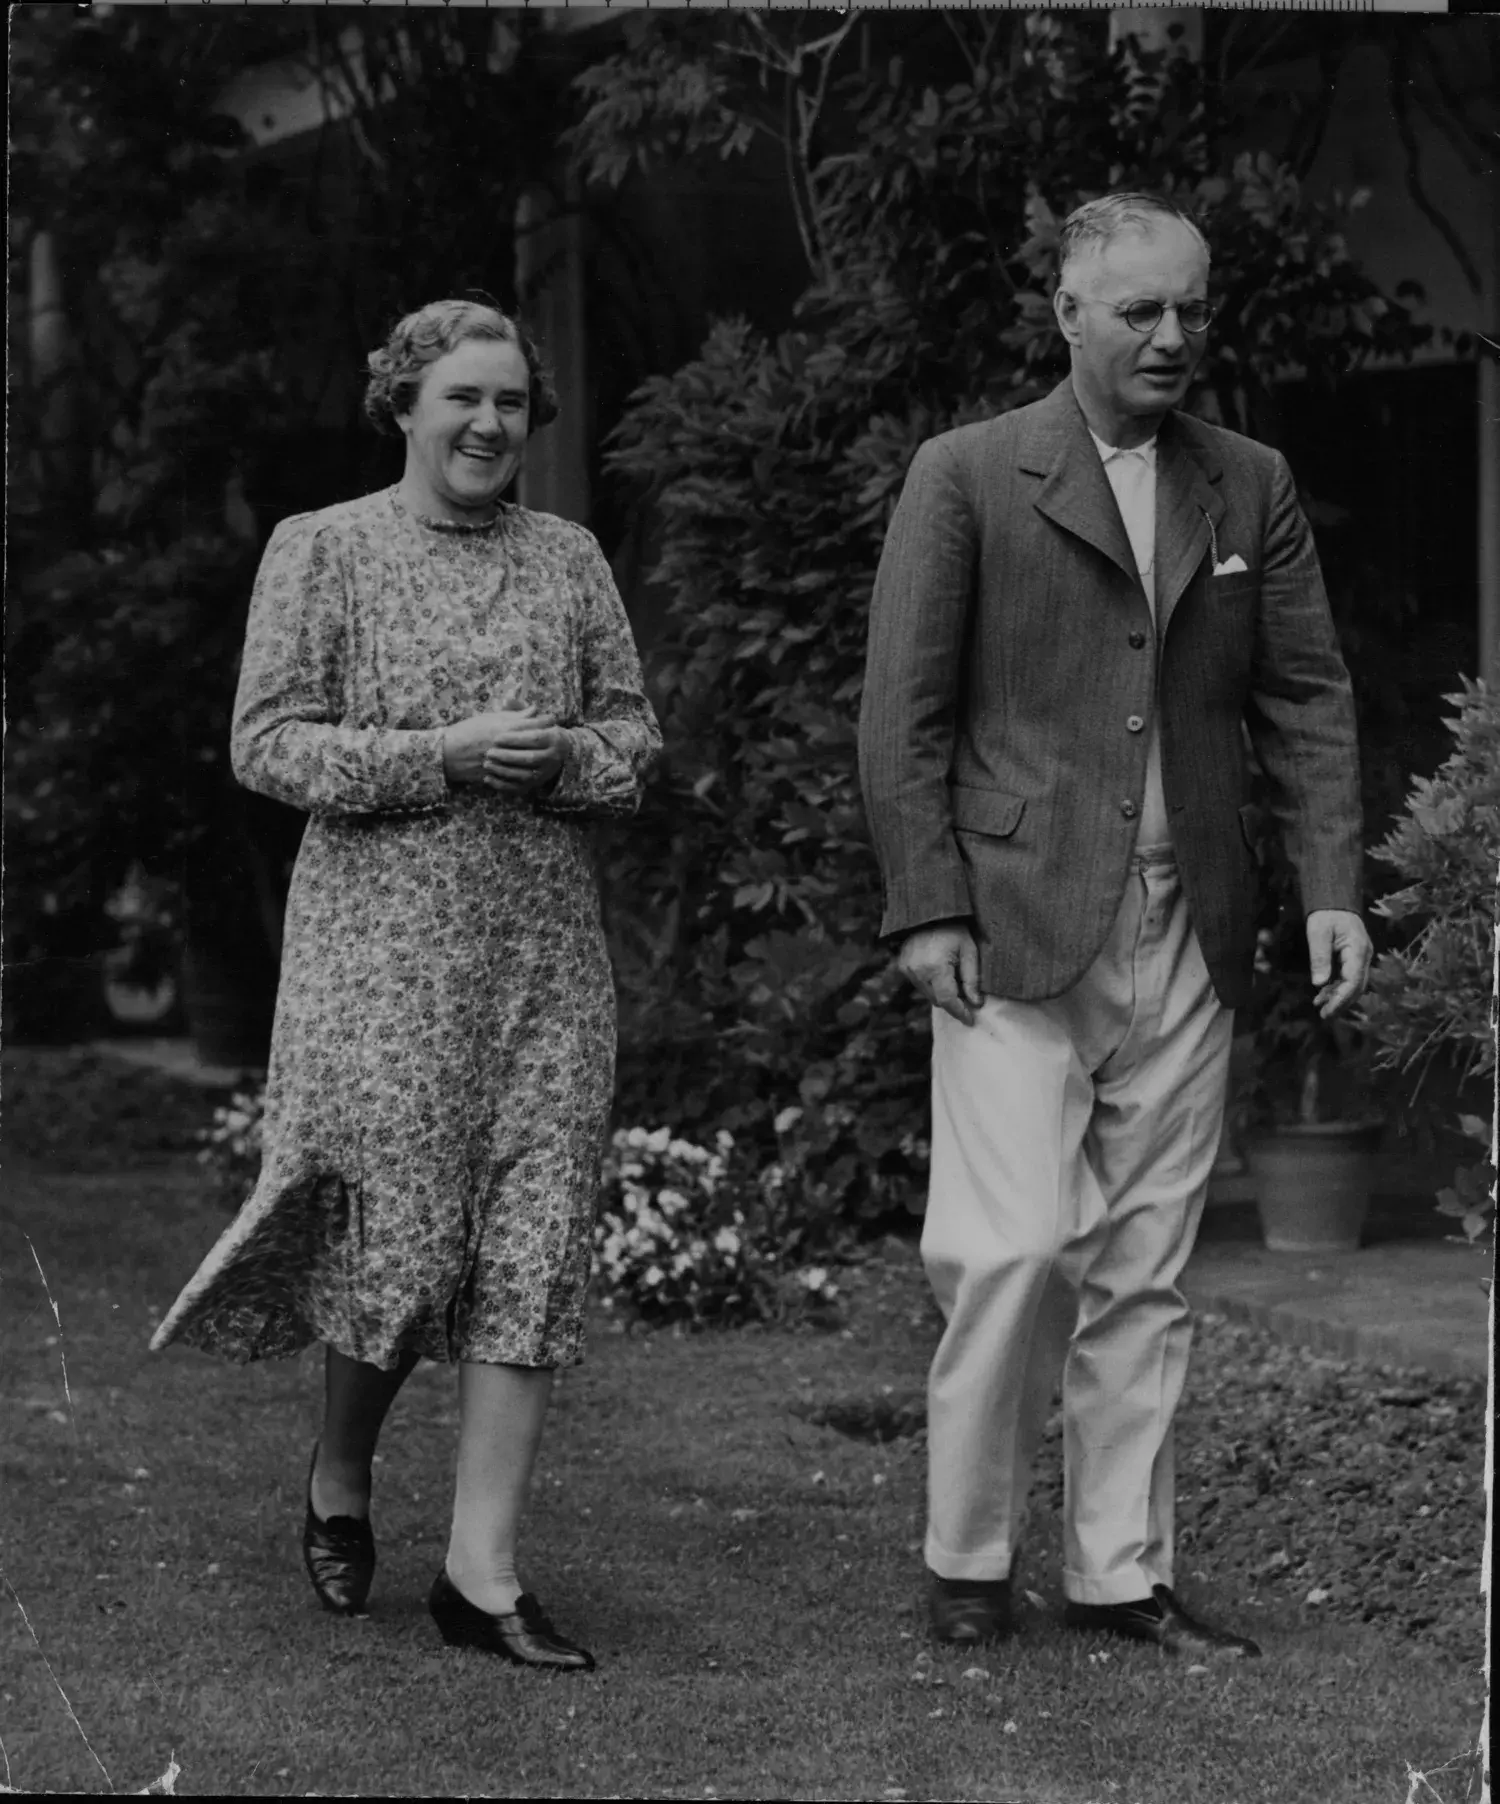 A black and white photo of John and Elsie Curtin walking in the backyard.  